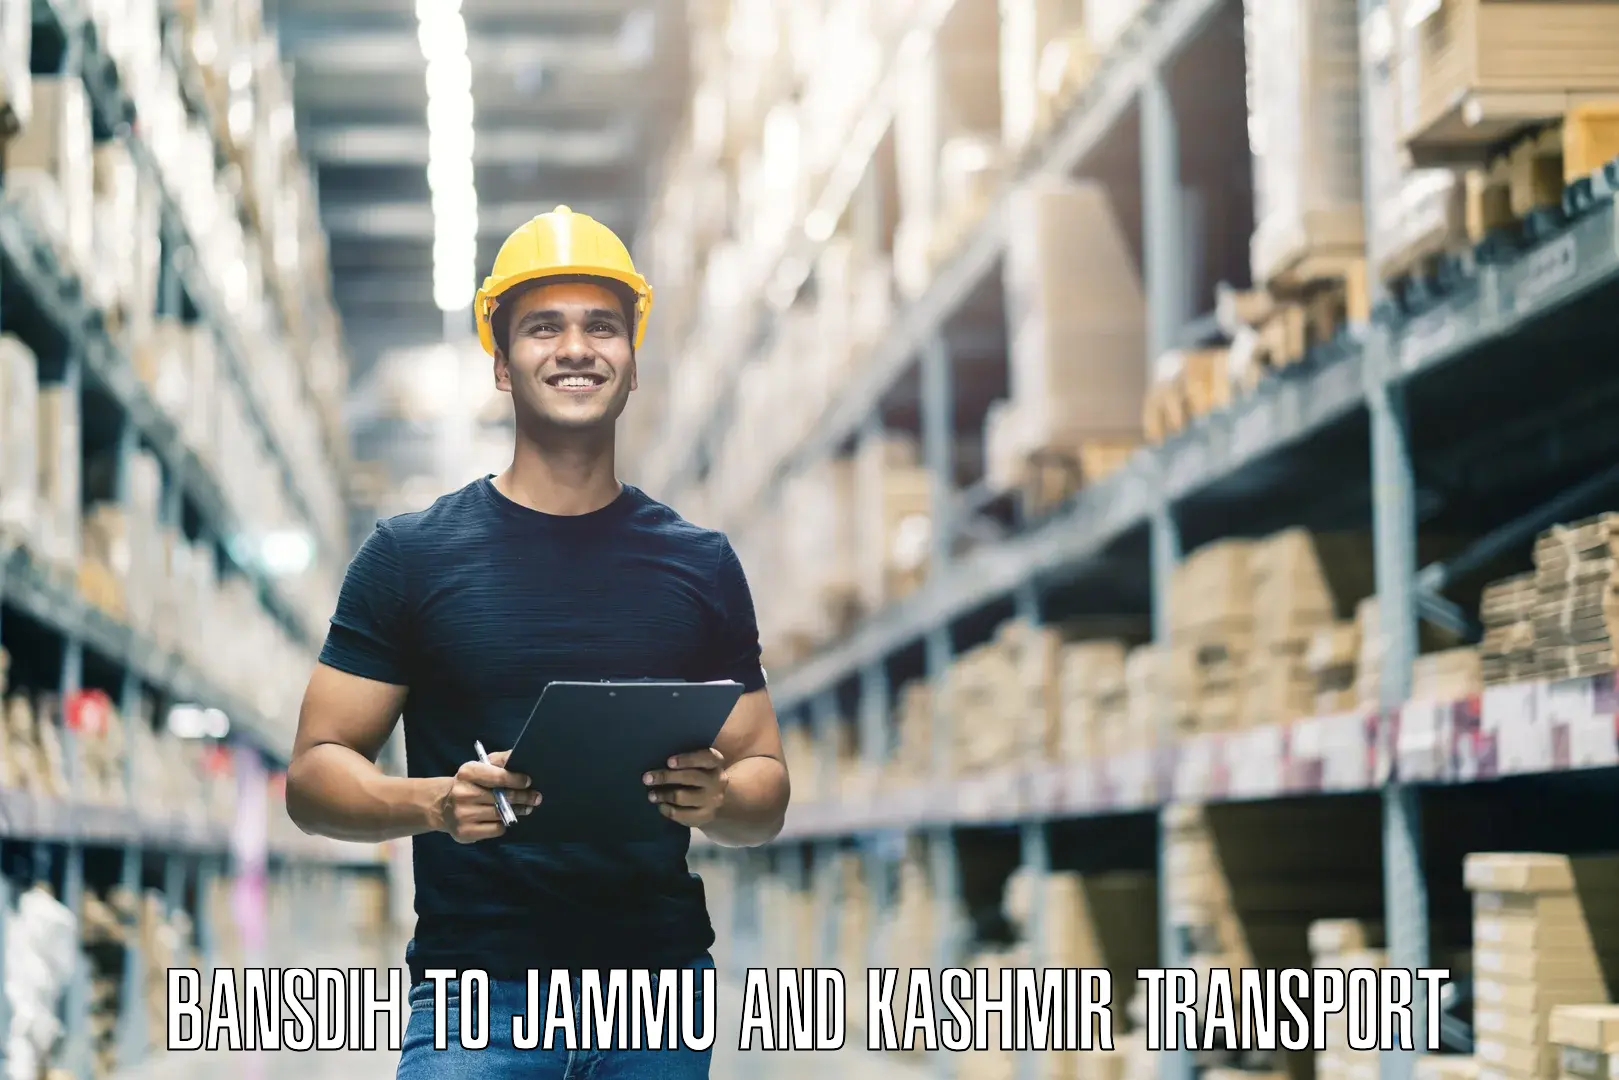 Truck transport companies in India Bansdih to Baramulla